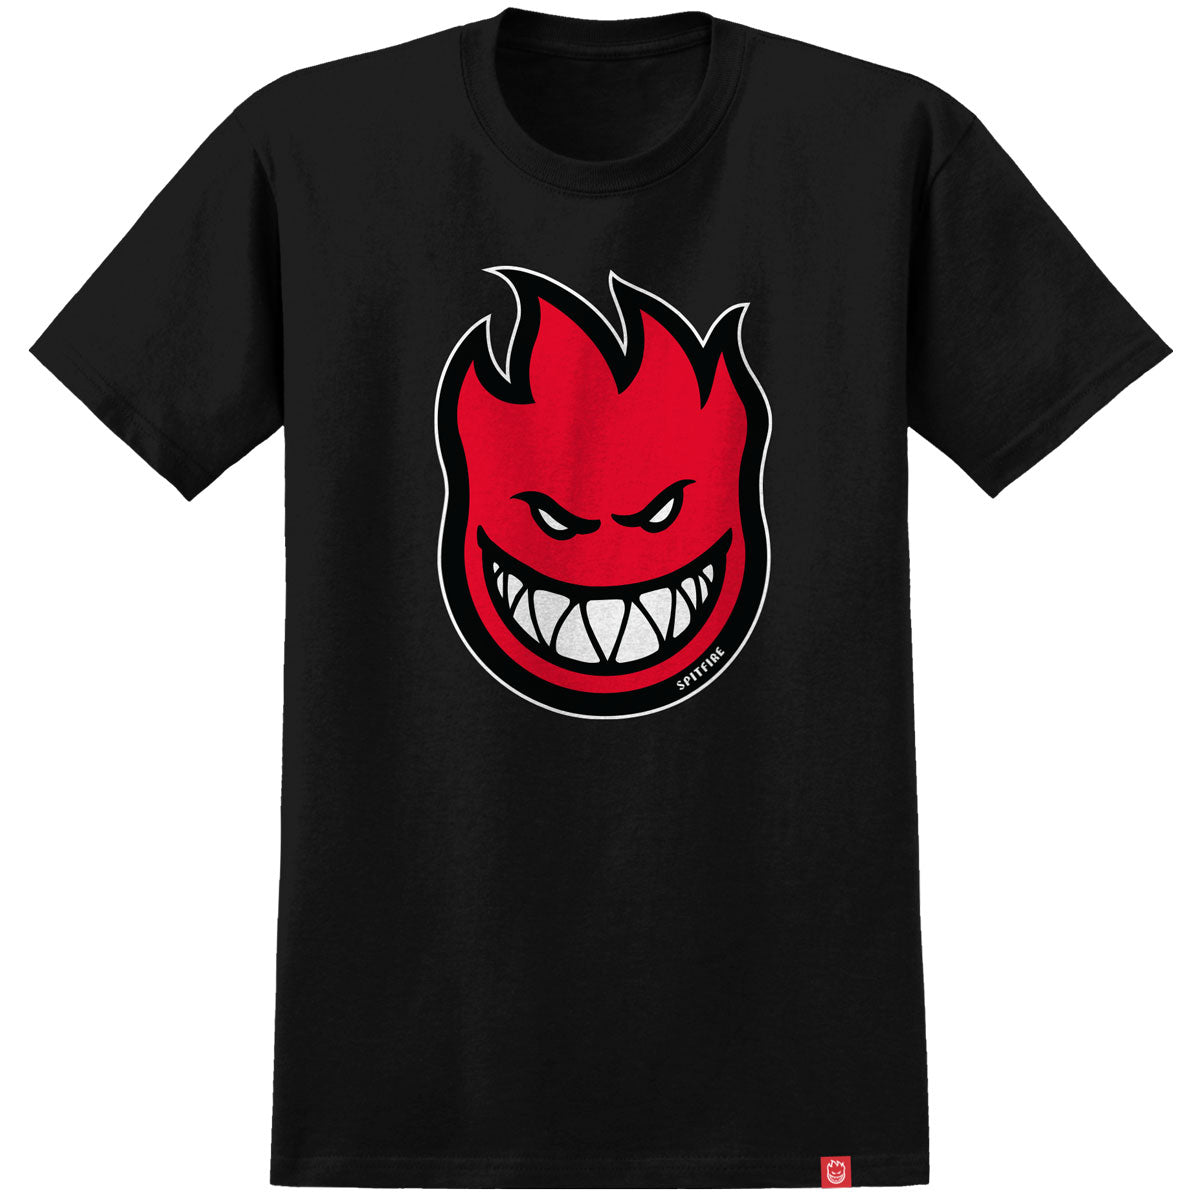 Spitfire Youth Bighead Fill T-Shirt - Black/Red image 1